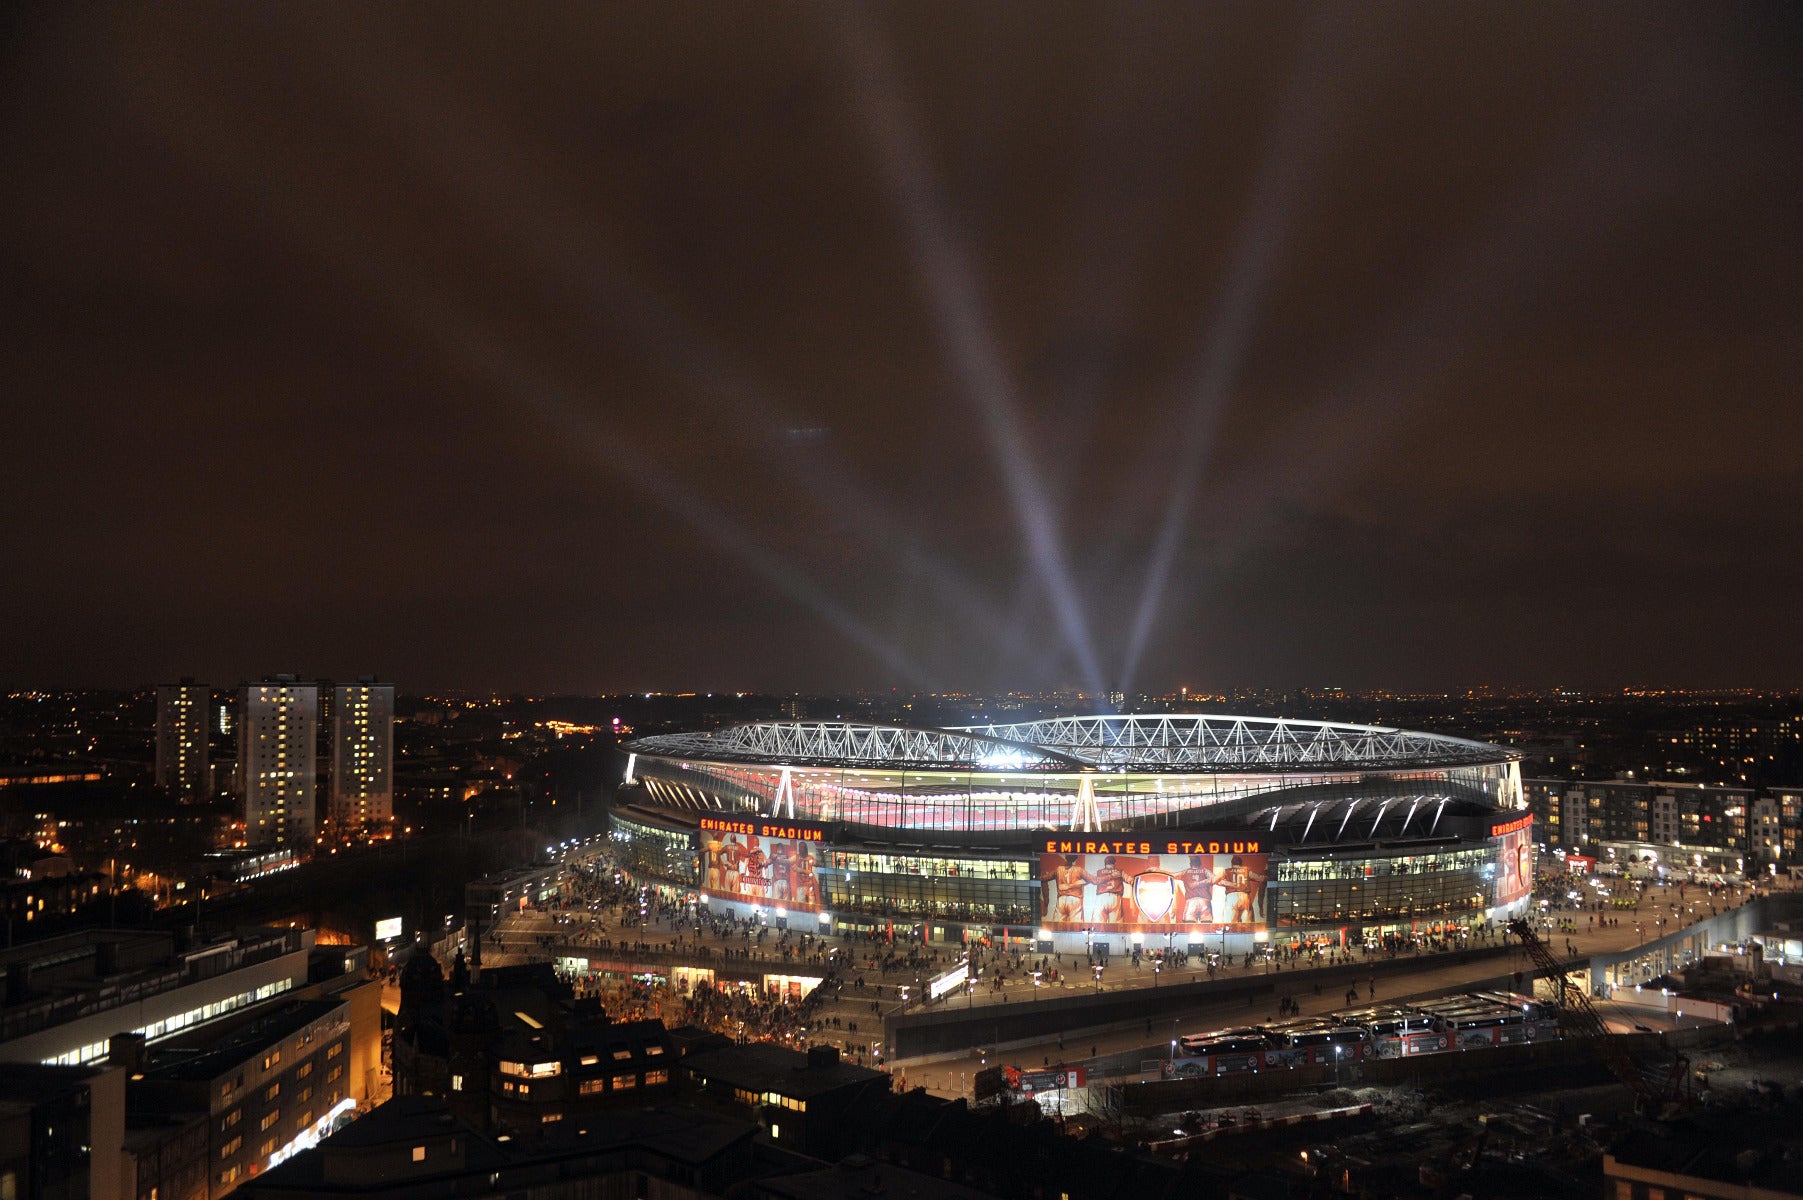 Arsenal Emirates Stadium Full Wall Mural Outside Night Time View With Lights